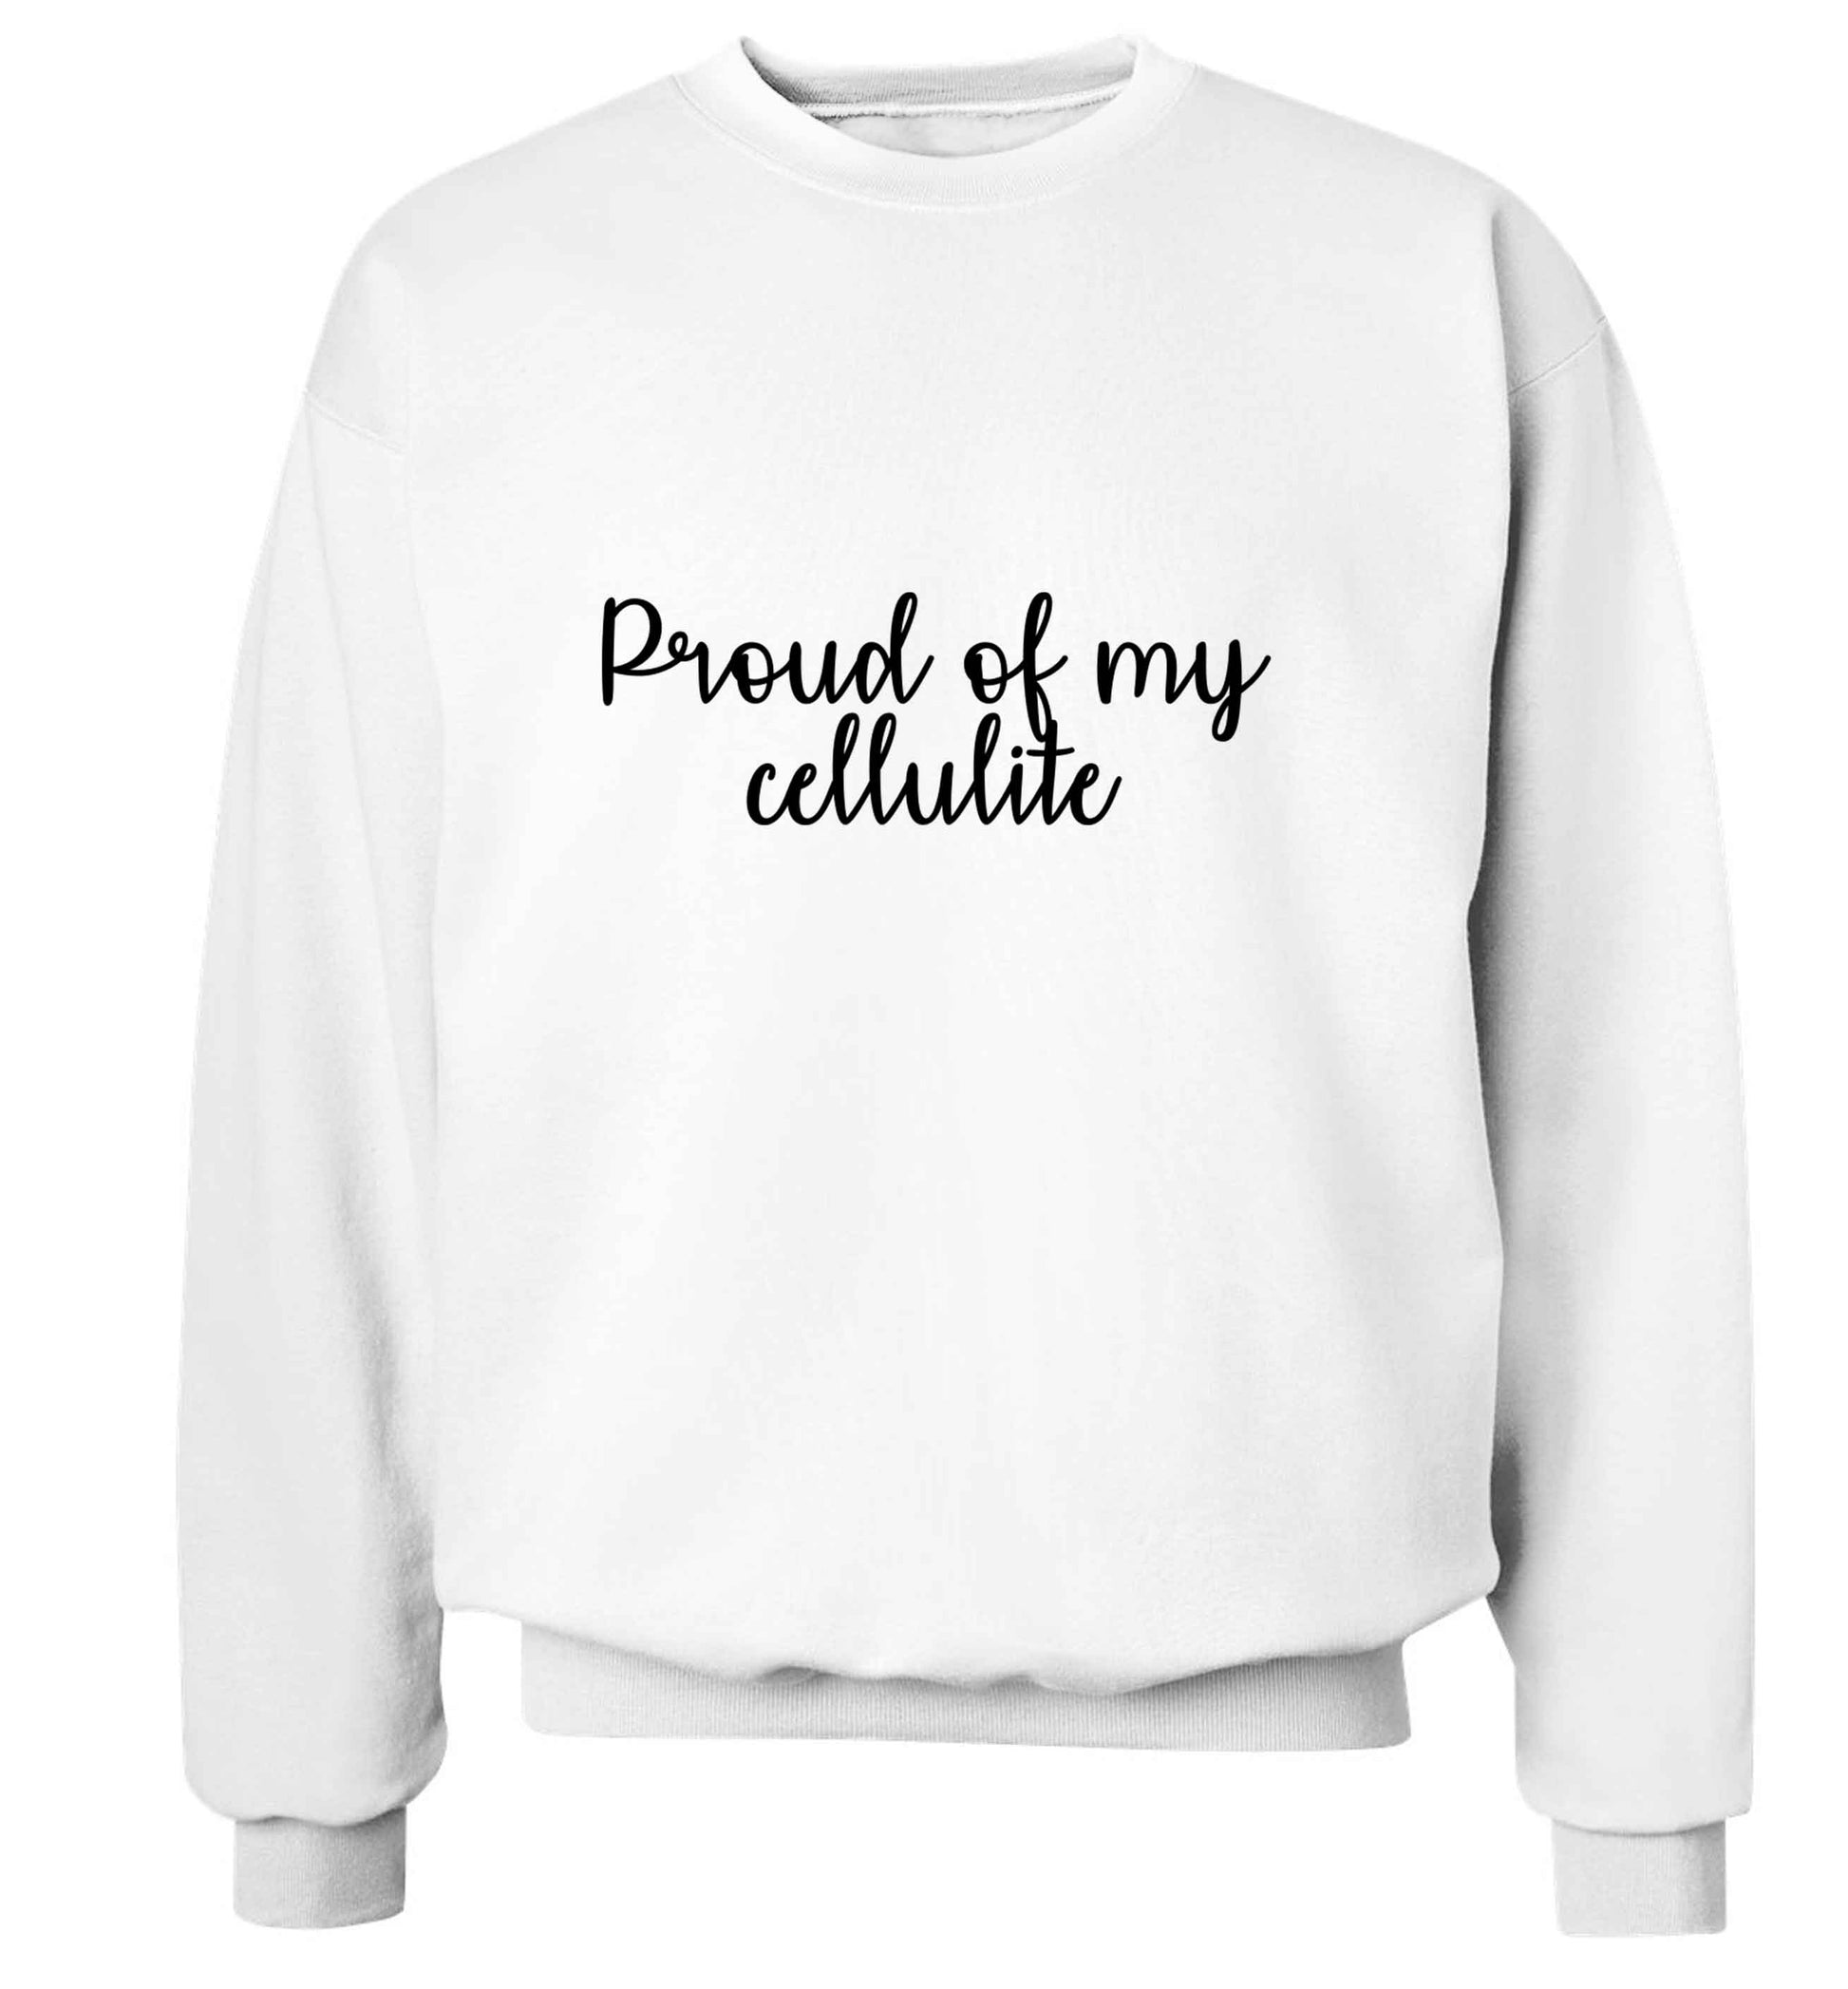 Proud of my cellulite adult's unisex white sweater 2XL